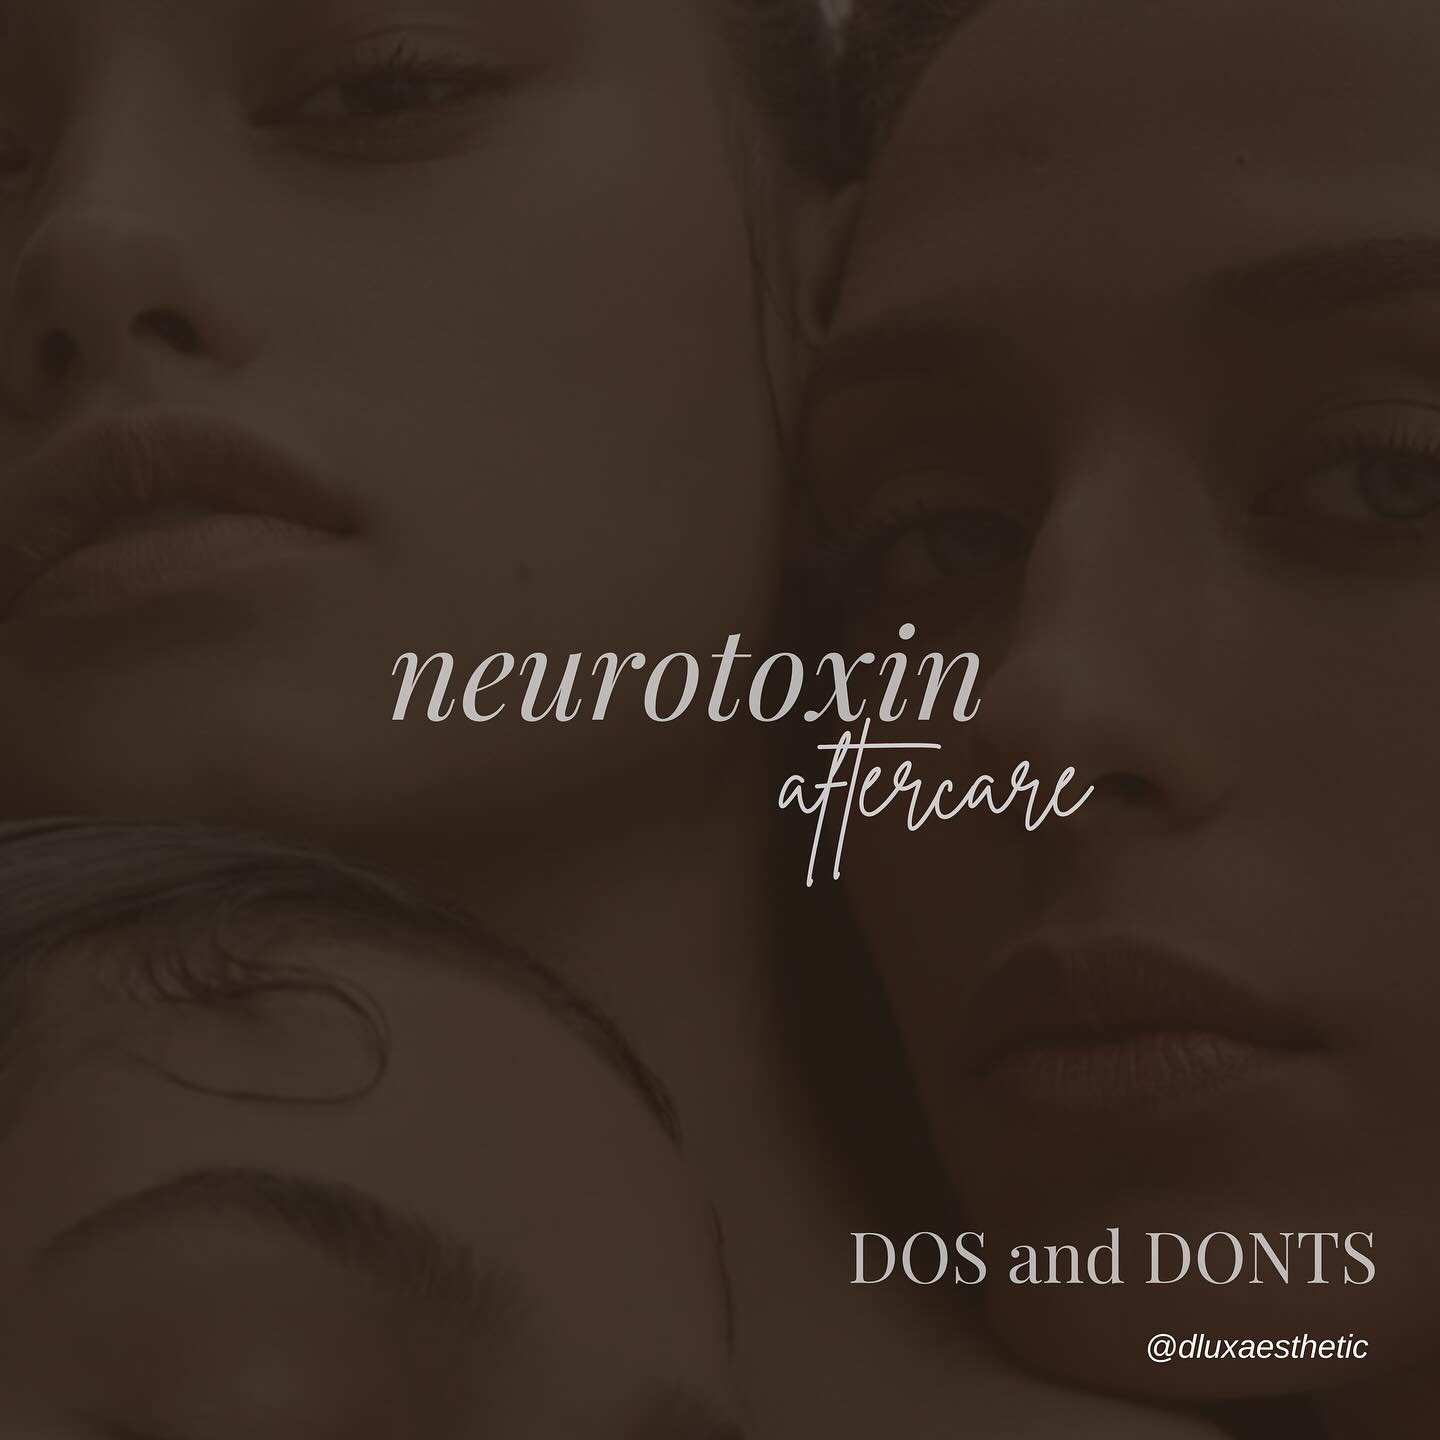 Follow these Dos and Donts for Neurotoxin aftercare 💉✨💋

👩🏼&zwj;⚕️ Danielle White, MSN, FNP-C
📍 6327 N. Andrews Ave. Ste 19 &amp; 22 Fort Lauderdale, Florida
💌 info@dluxaesthetic.com
📞 (954) 580-3190

#dluxaesthetics #allergen #fortlauderdalem